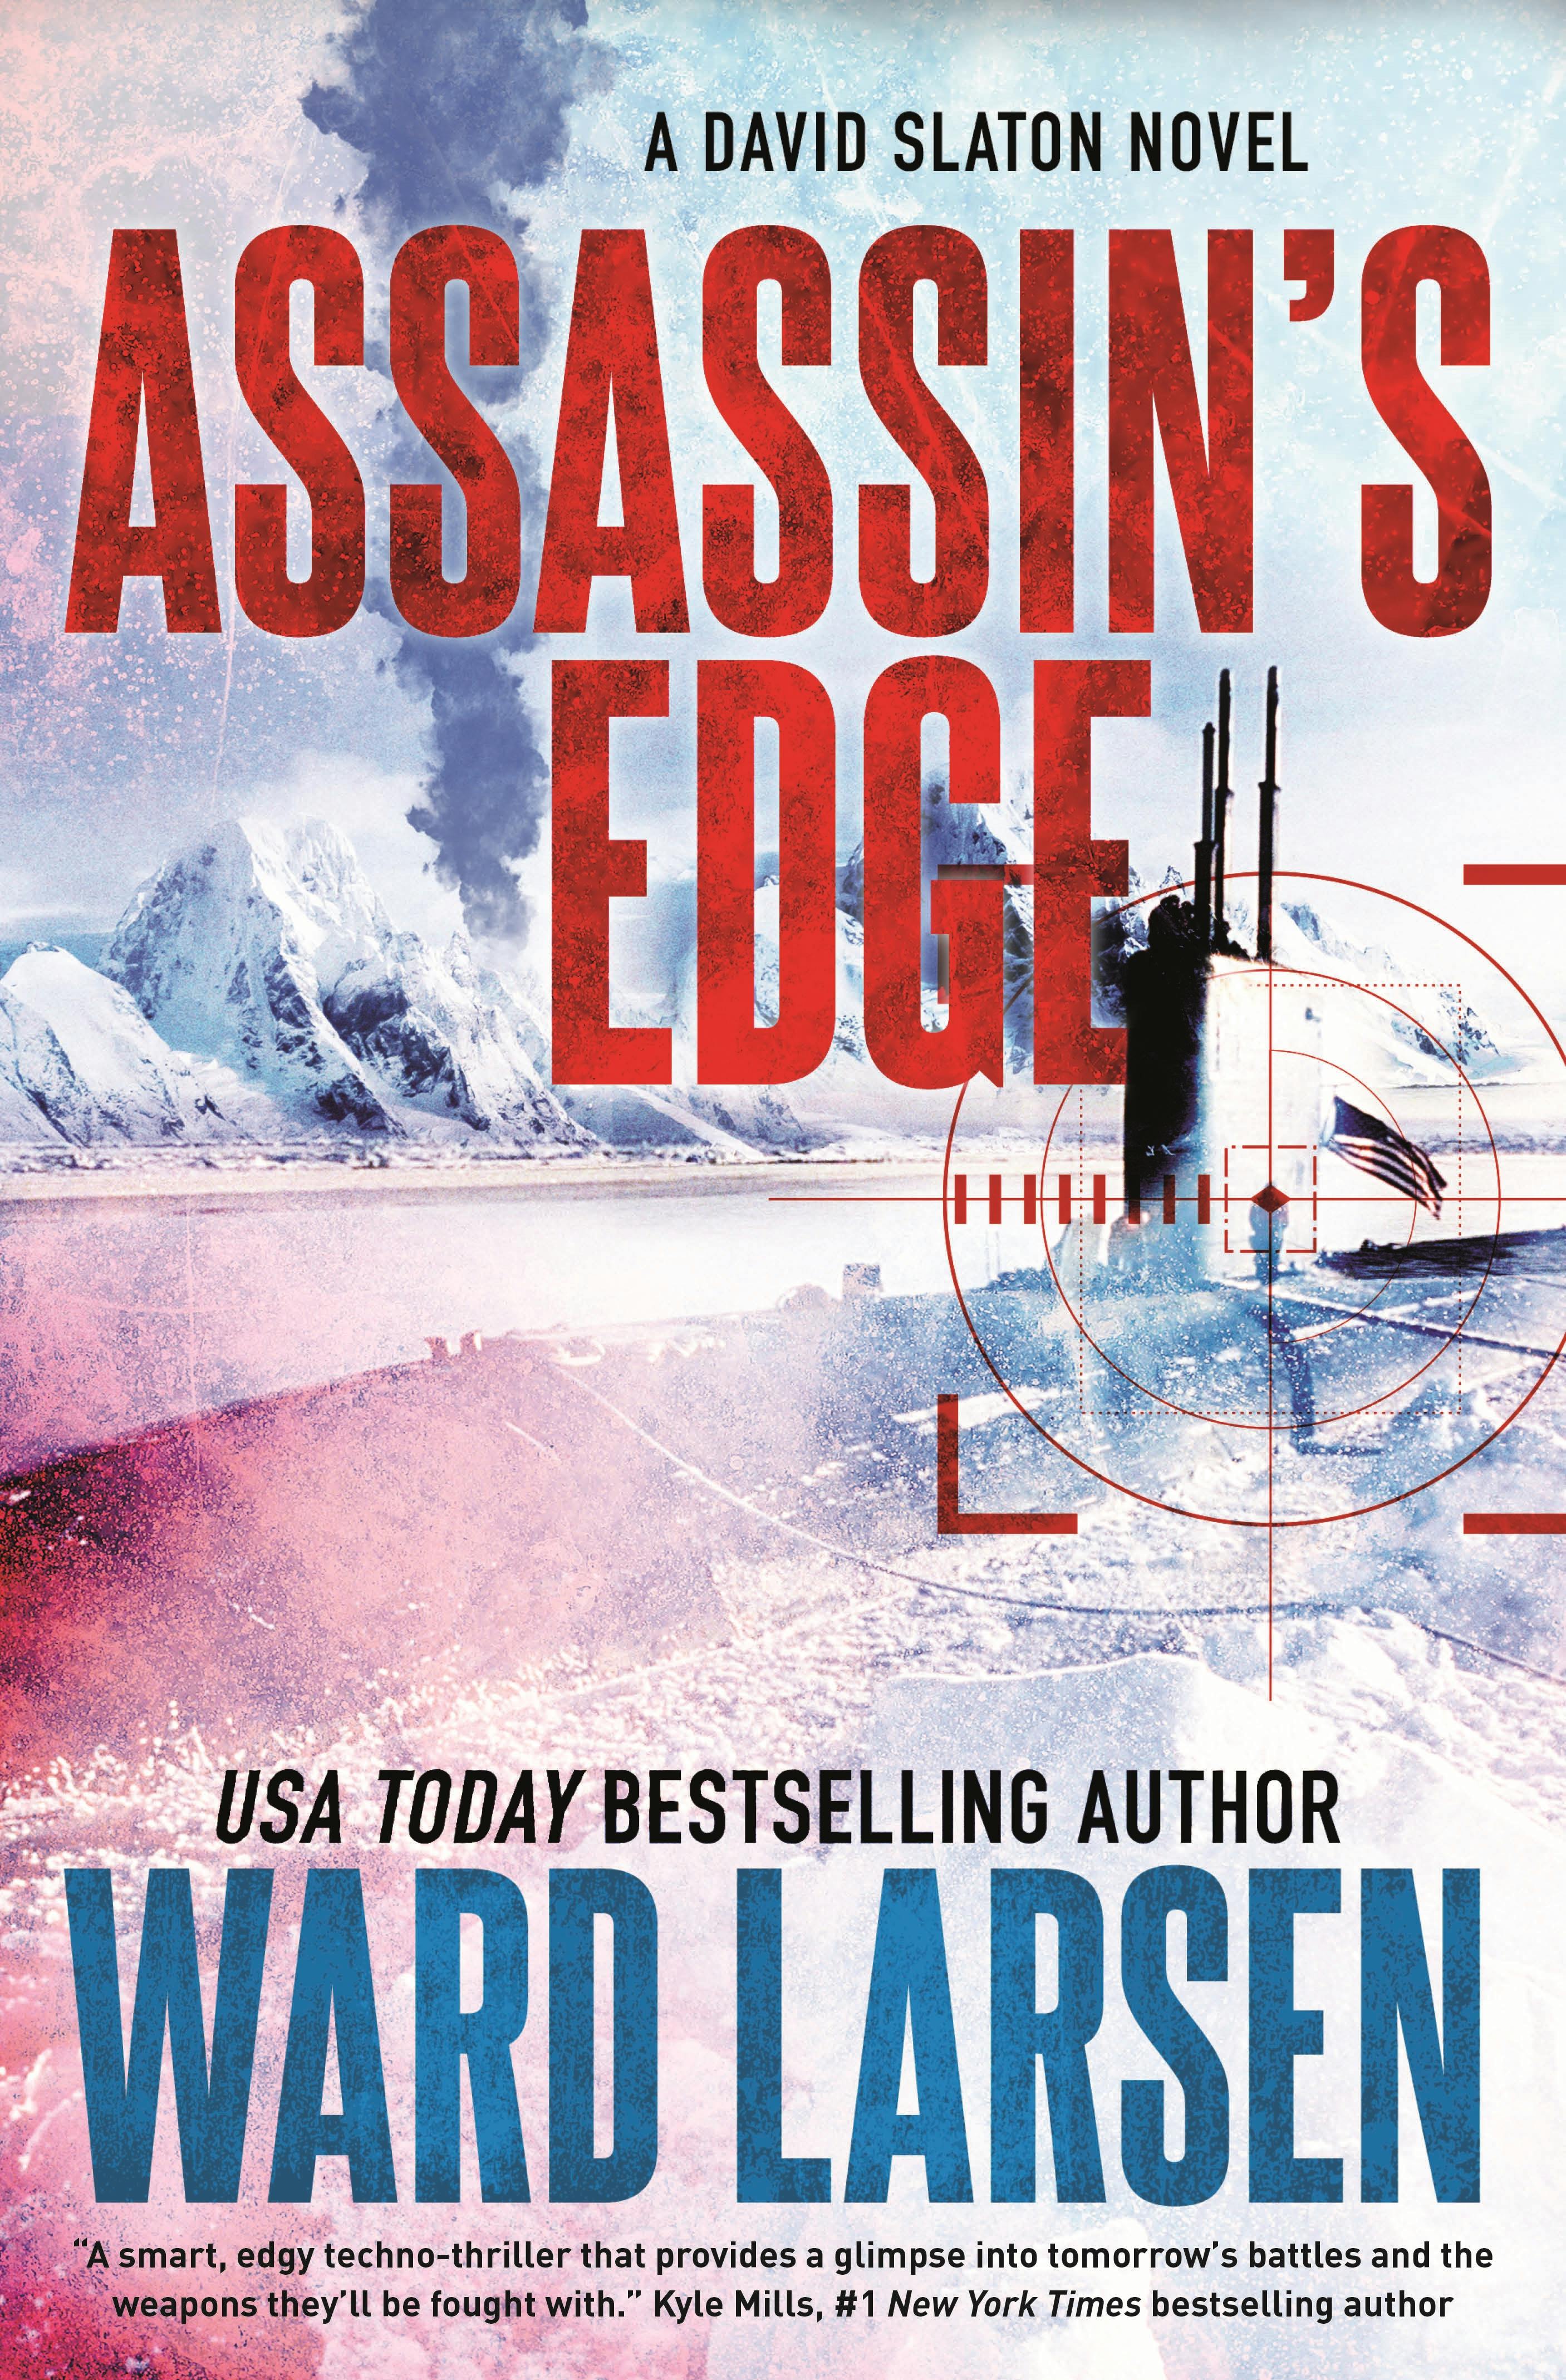 Cover for the book titled as: Assassin's Edge